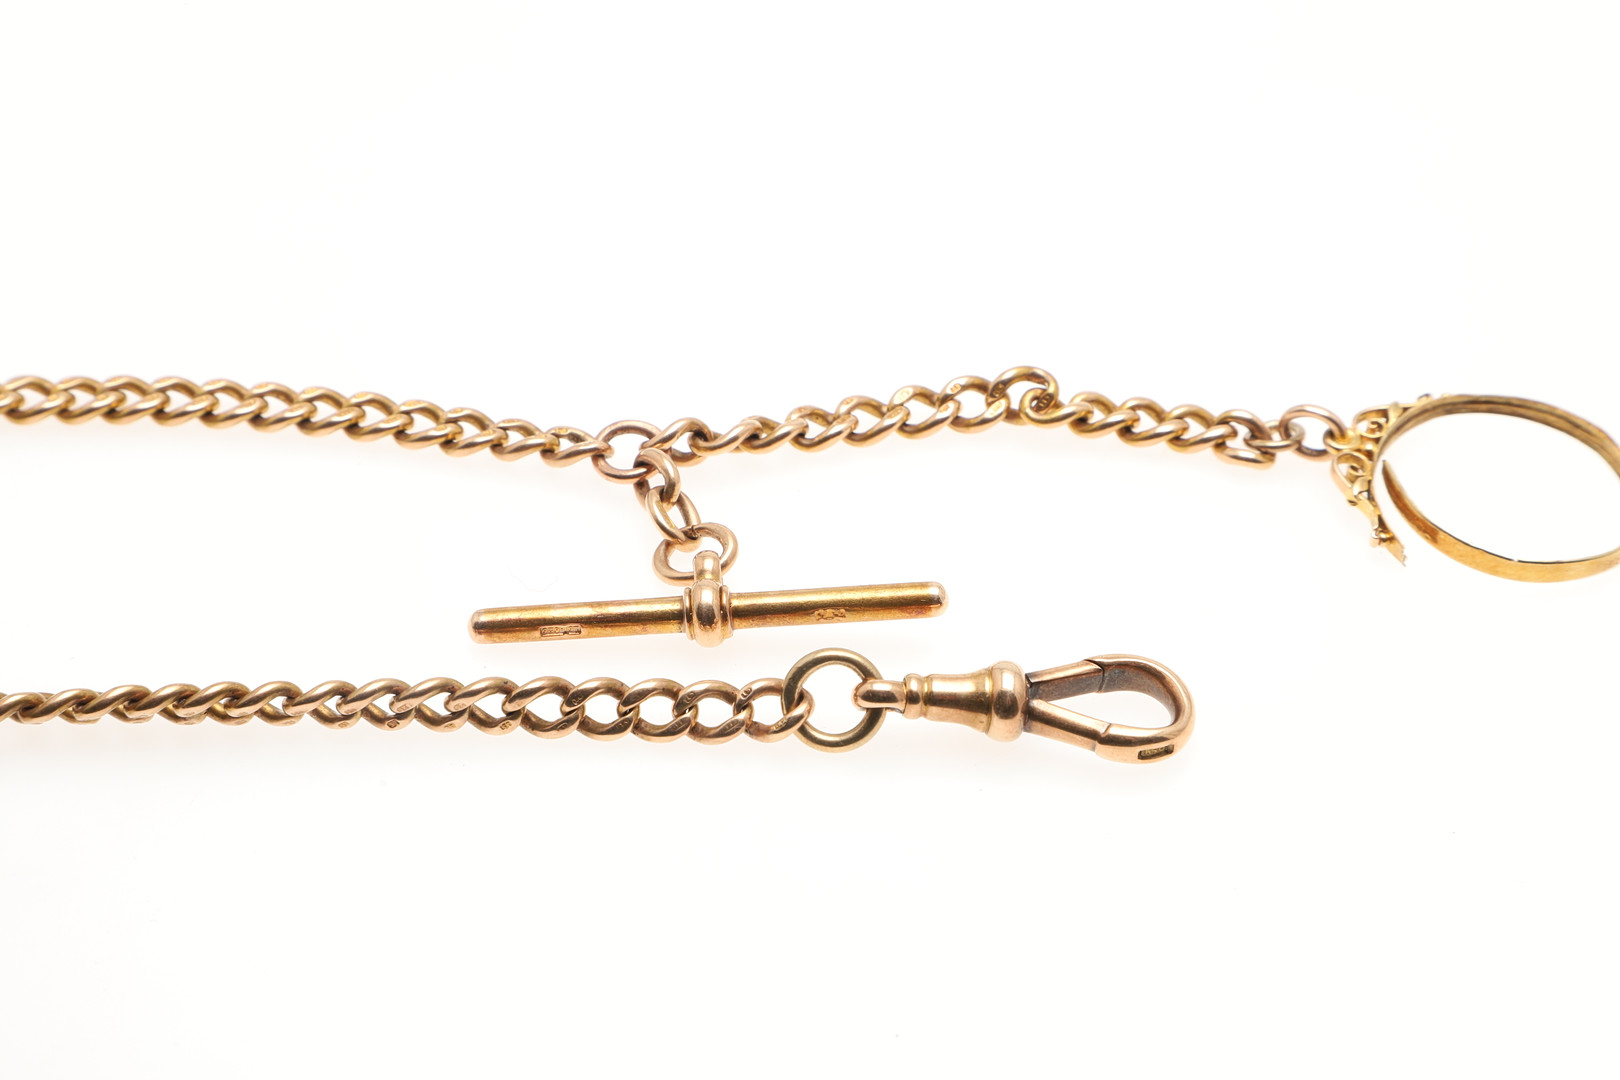 A 15CT GOLD CURB LINK WATCH CHAIN. - Image 2 of 2